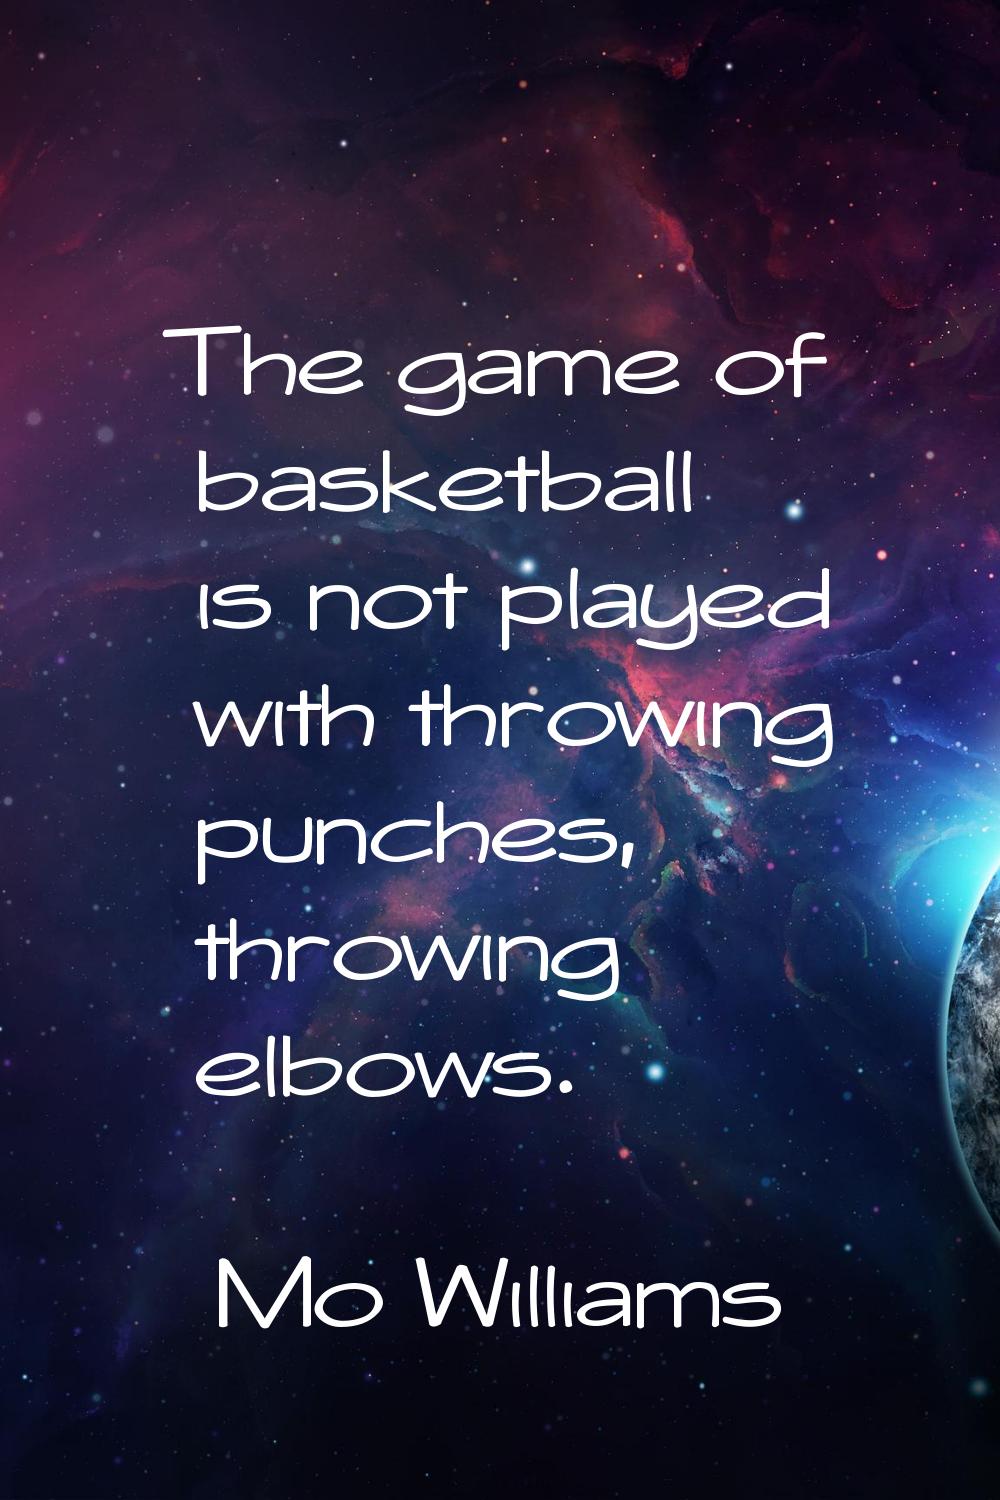 The game of basketball is not played with throwing punches, throwing elbows.